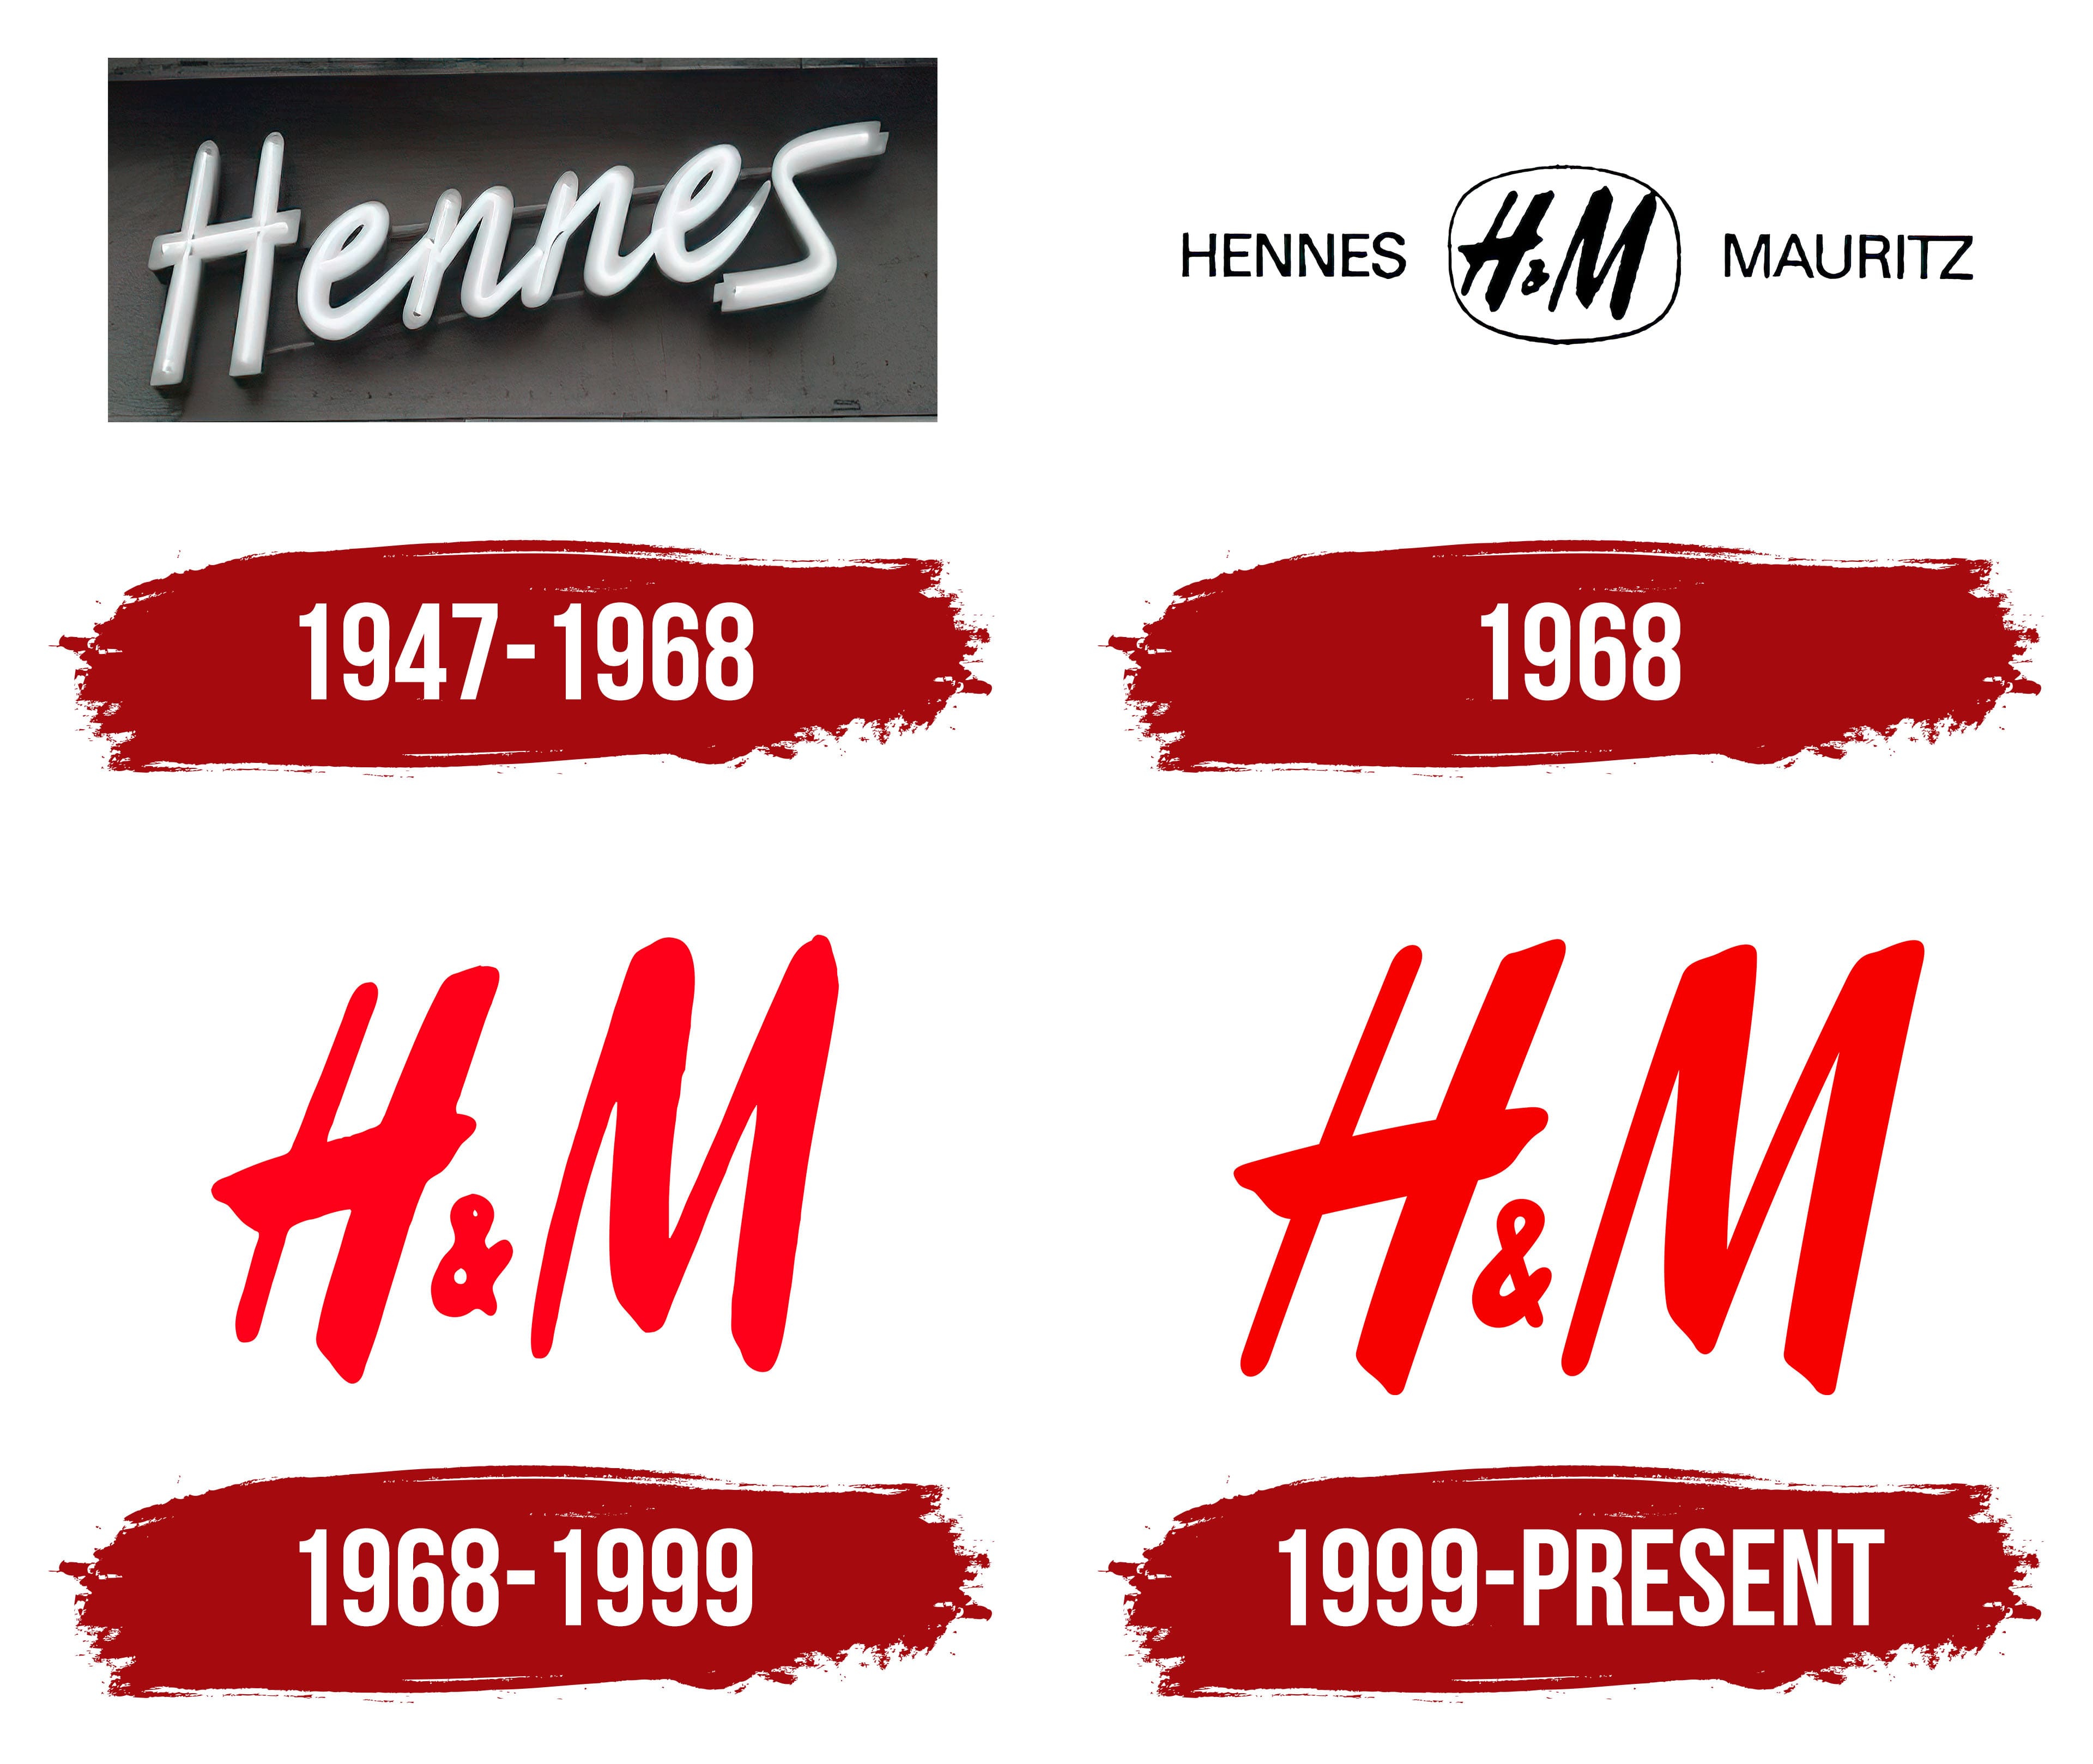 Exterior of H & M Fashion Clothing Shop Showing Company Name, Logo